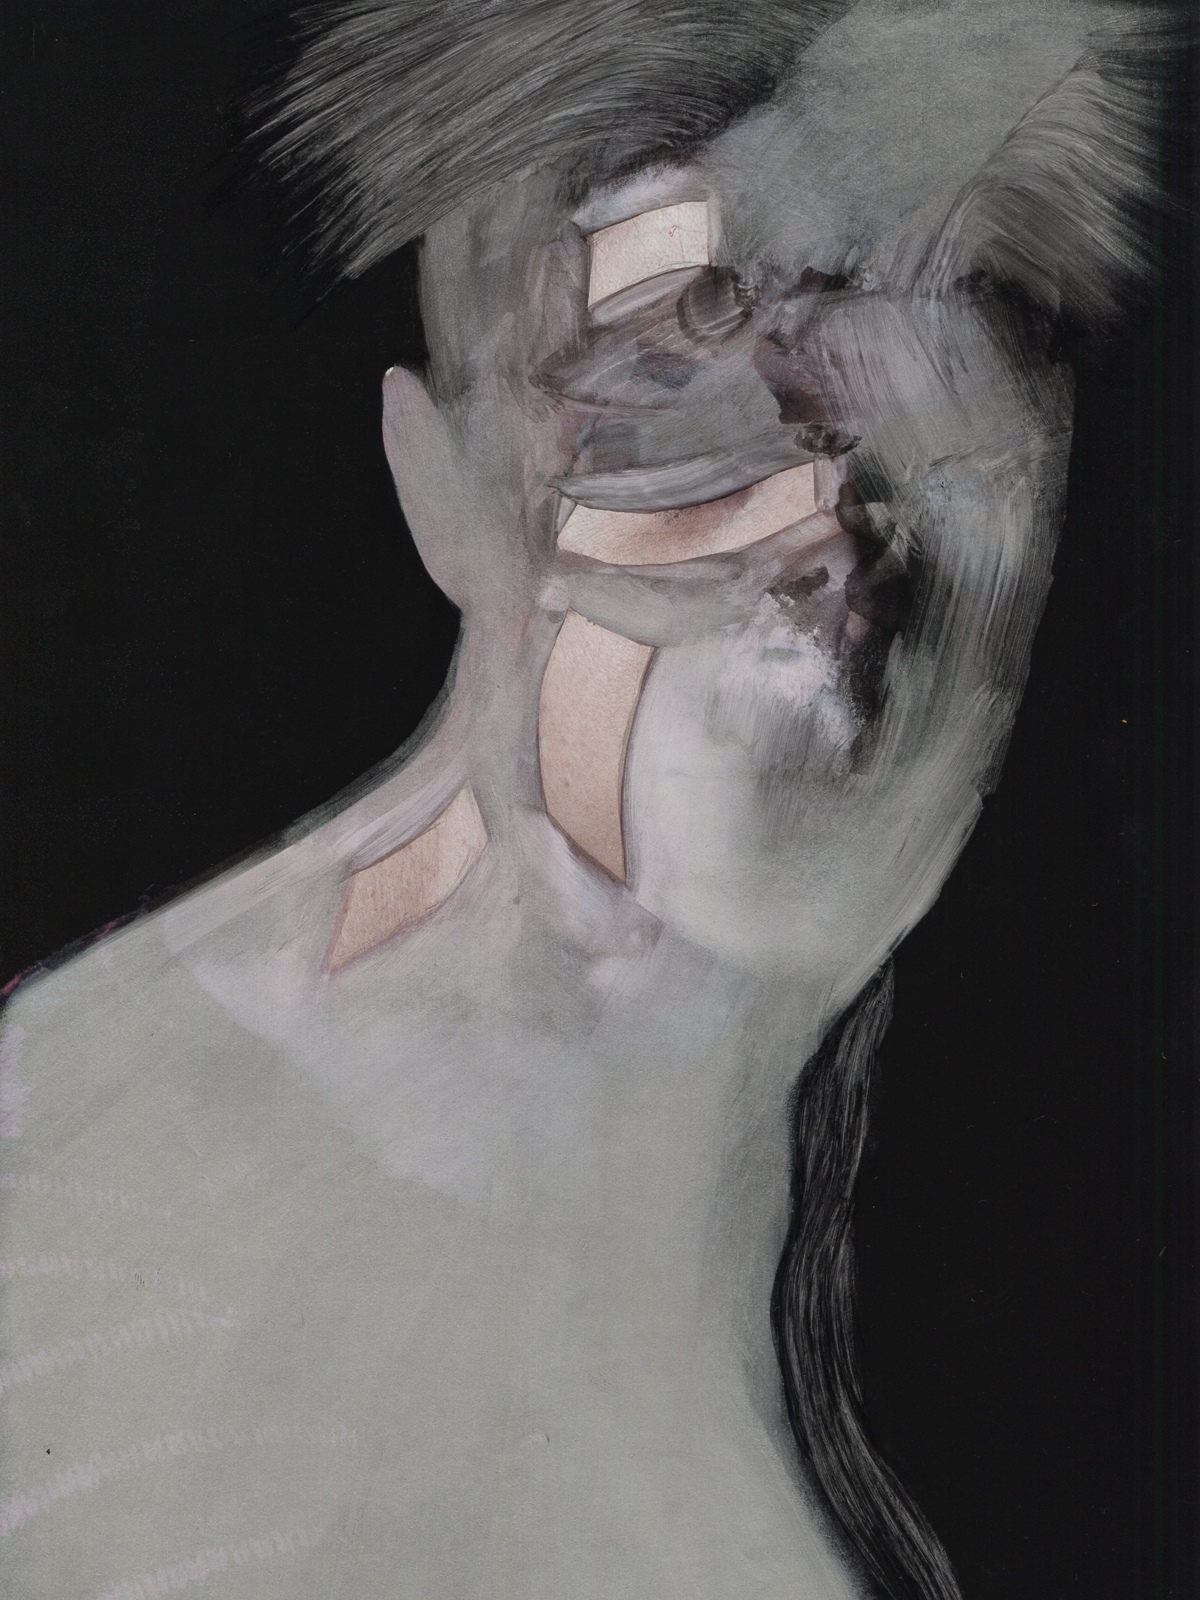 "Tapehead", 20.5 x 27,7 cm, lavenderoil on magazine page